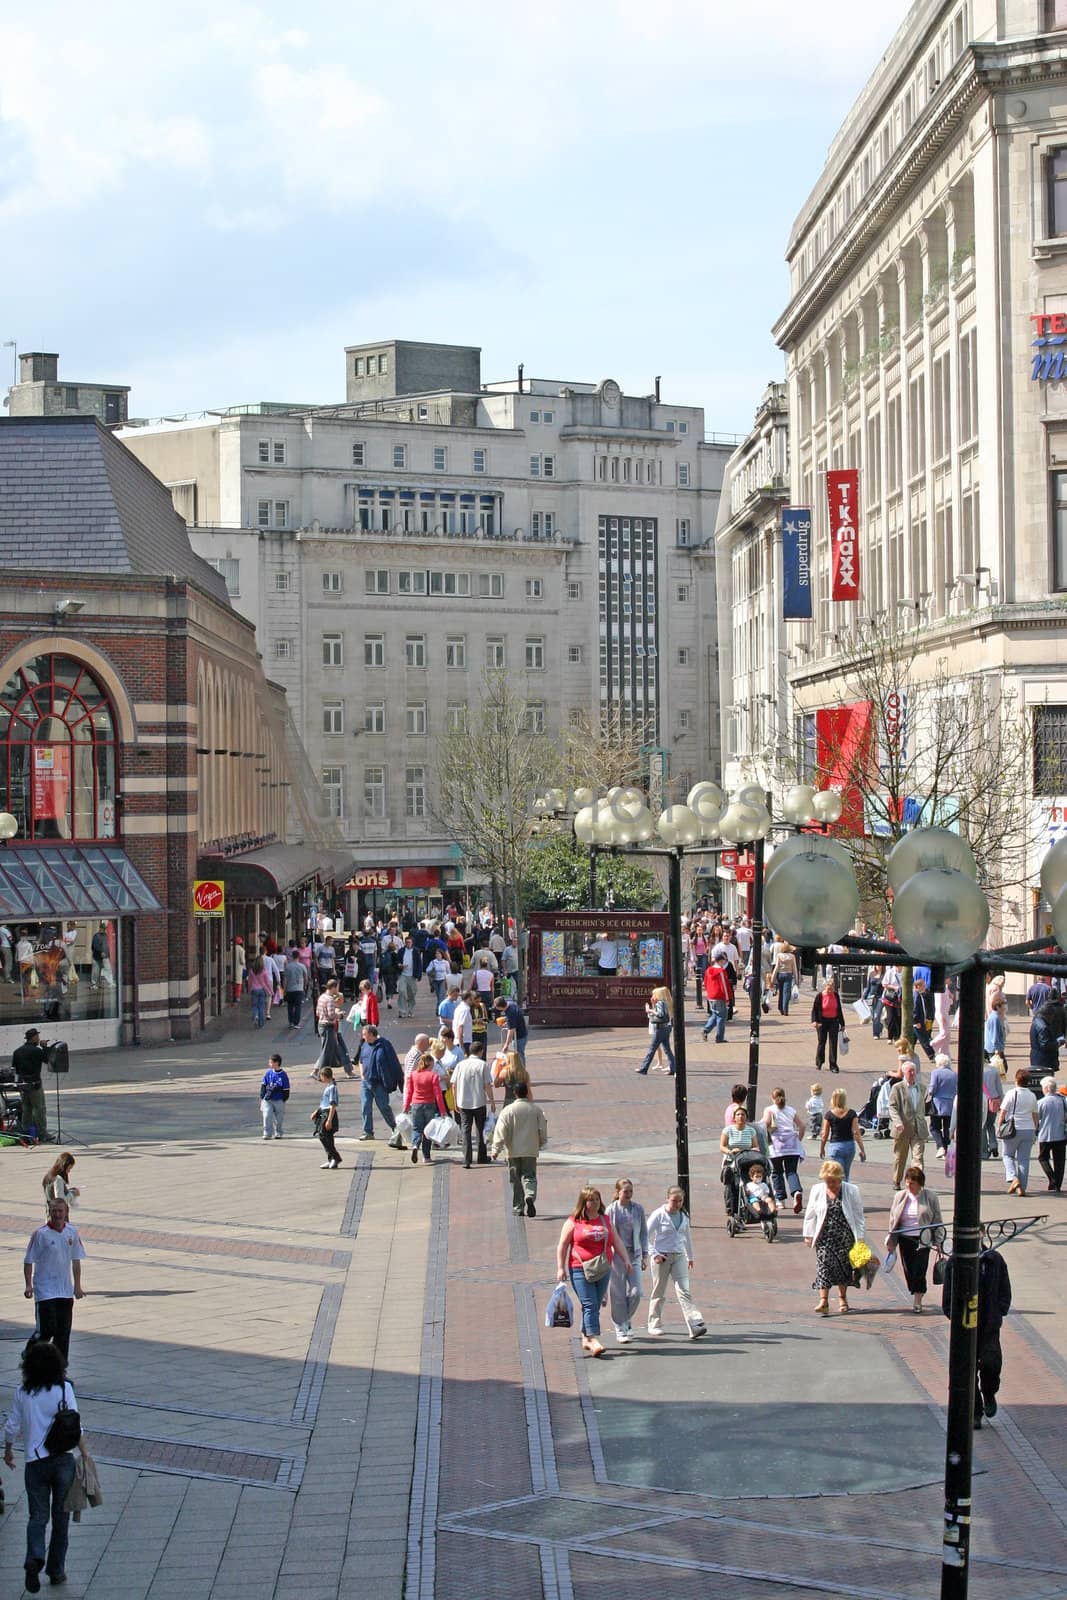 Shoppers in Liverpool England